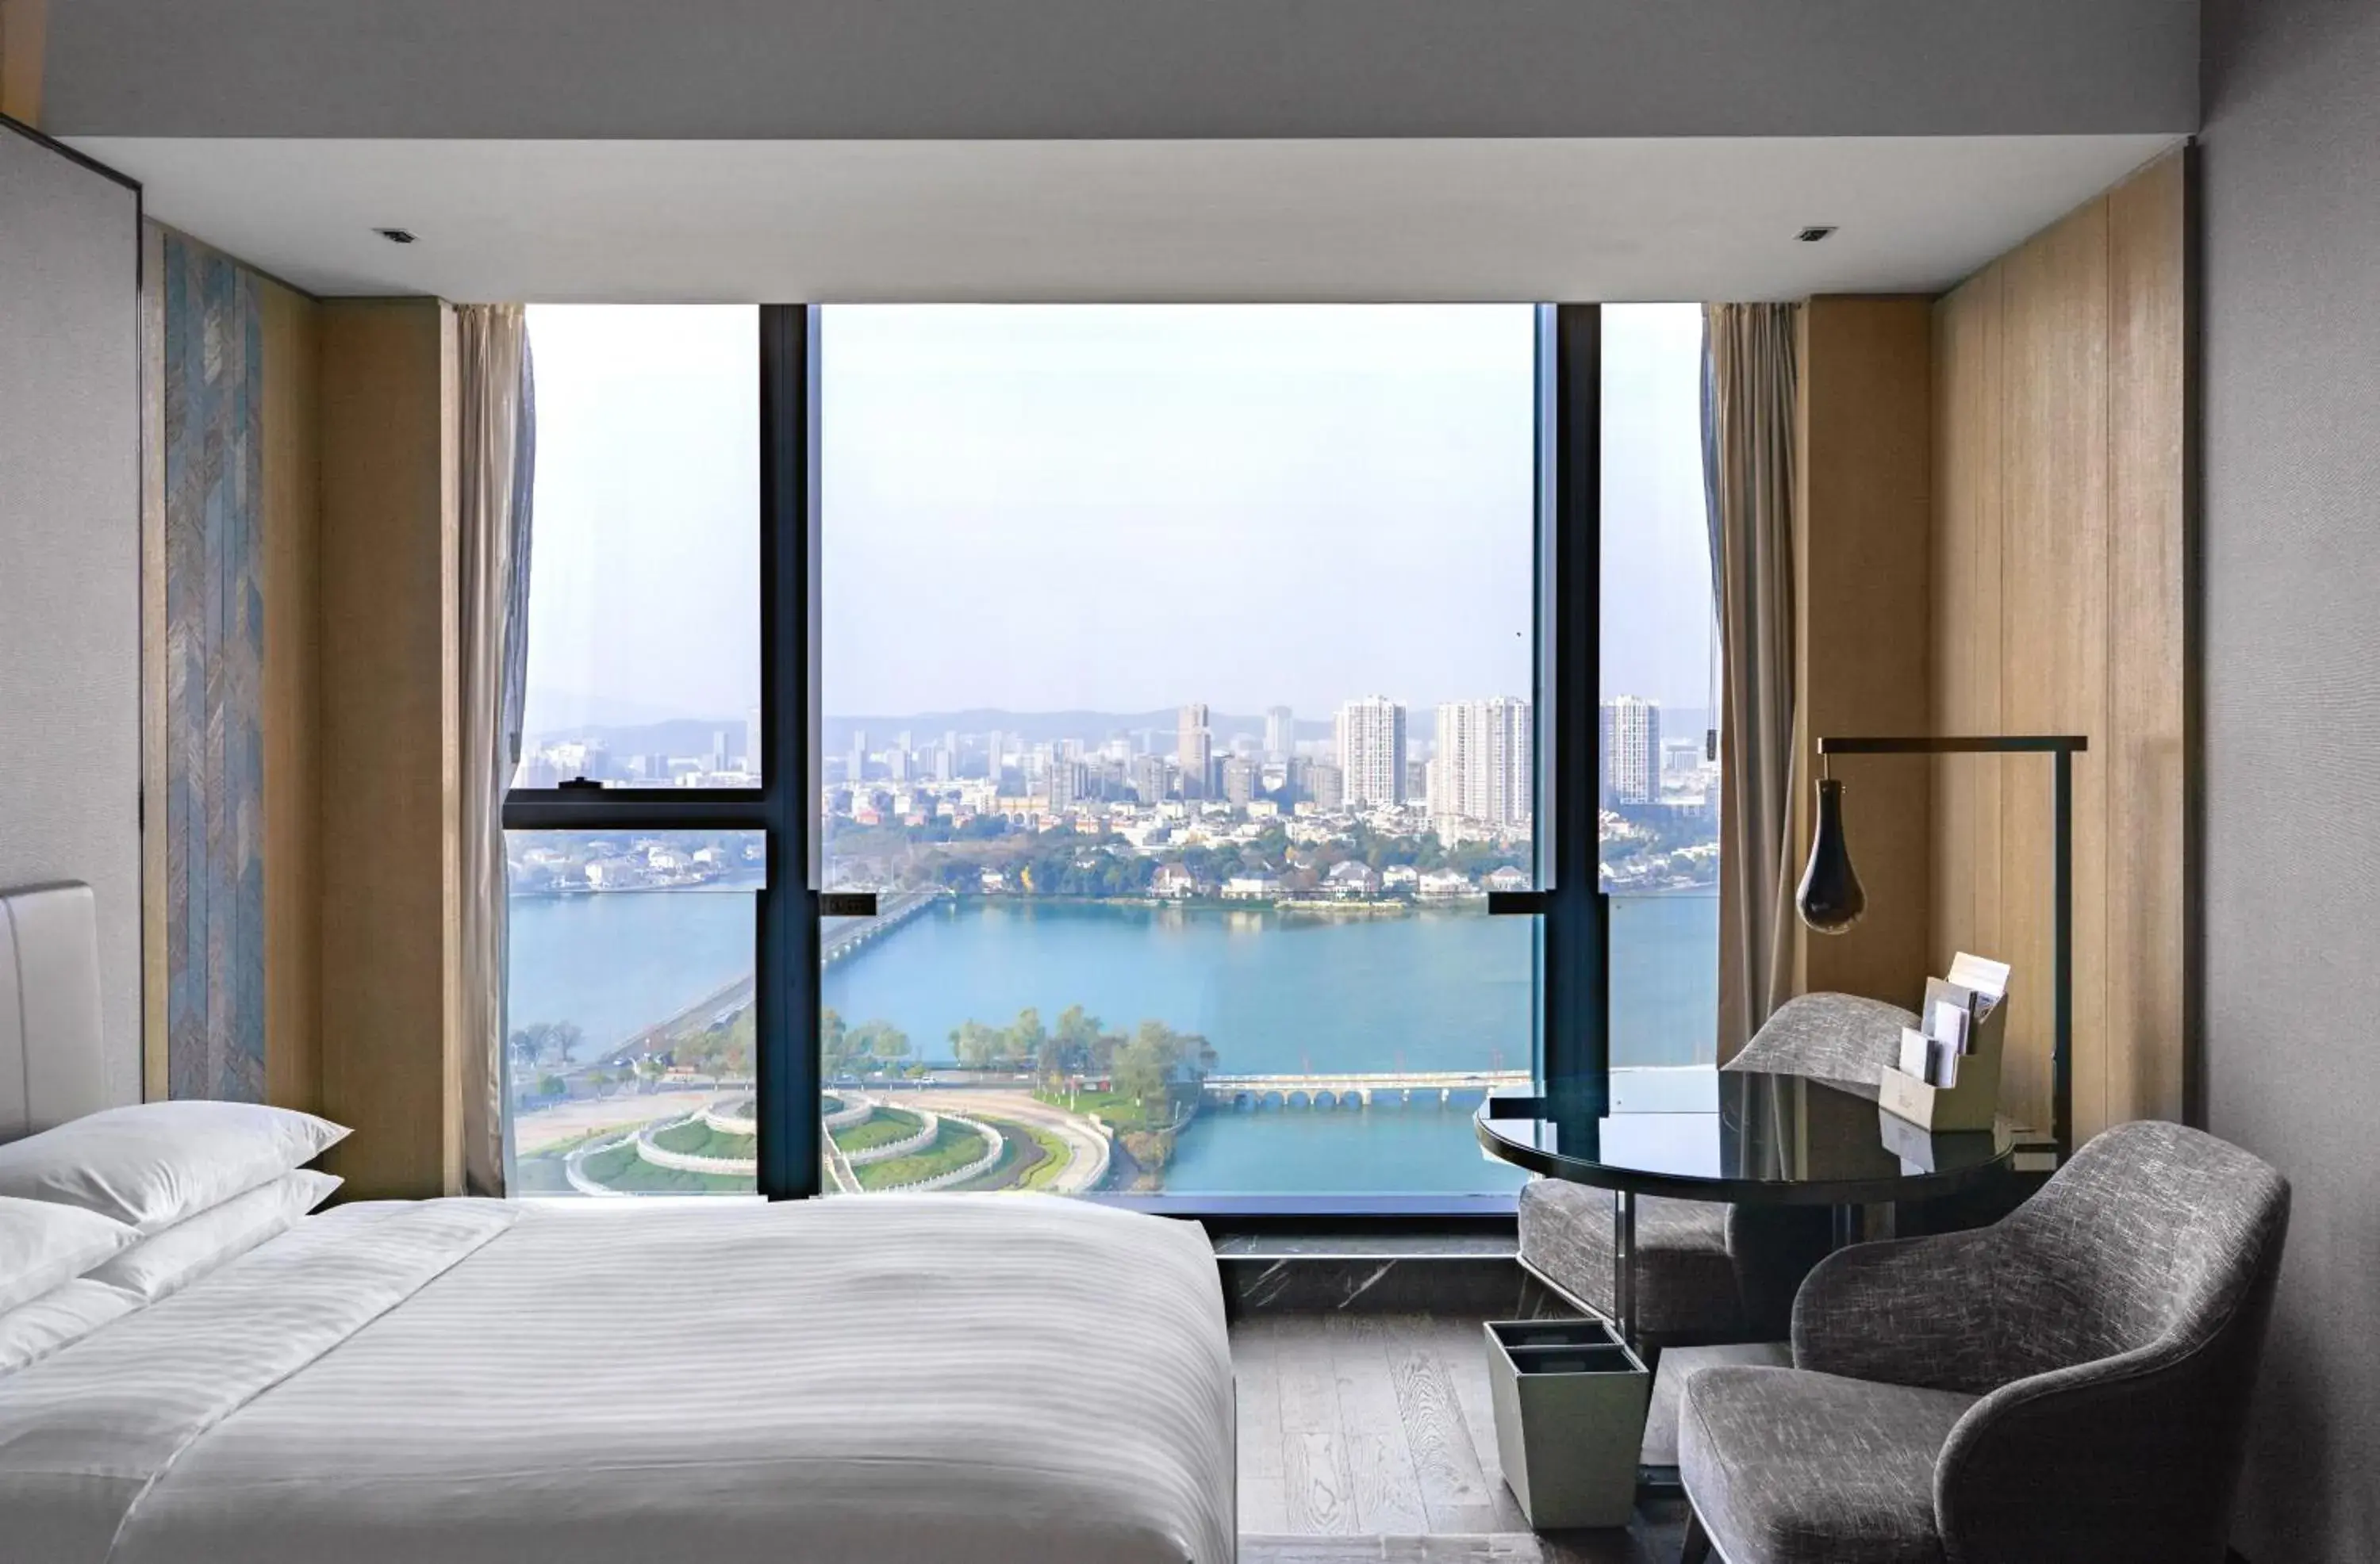 Lake view in Marriott Nanjing South Hotel